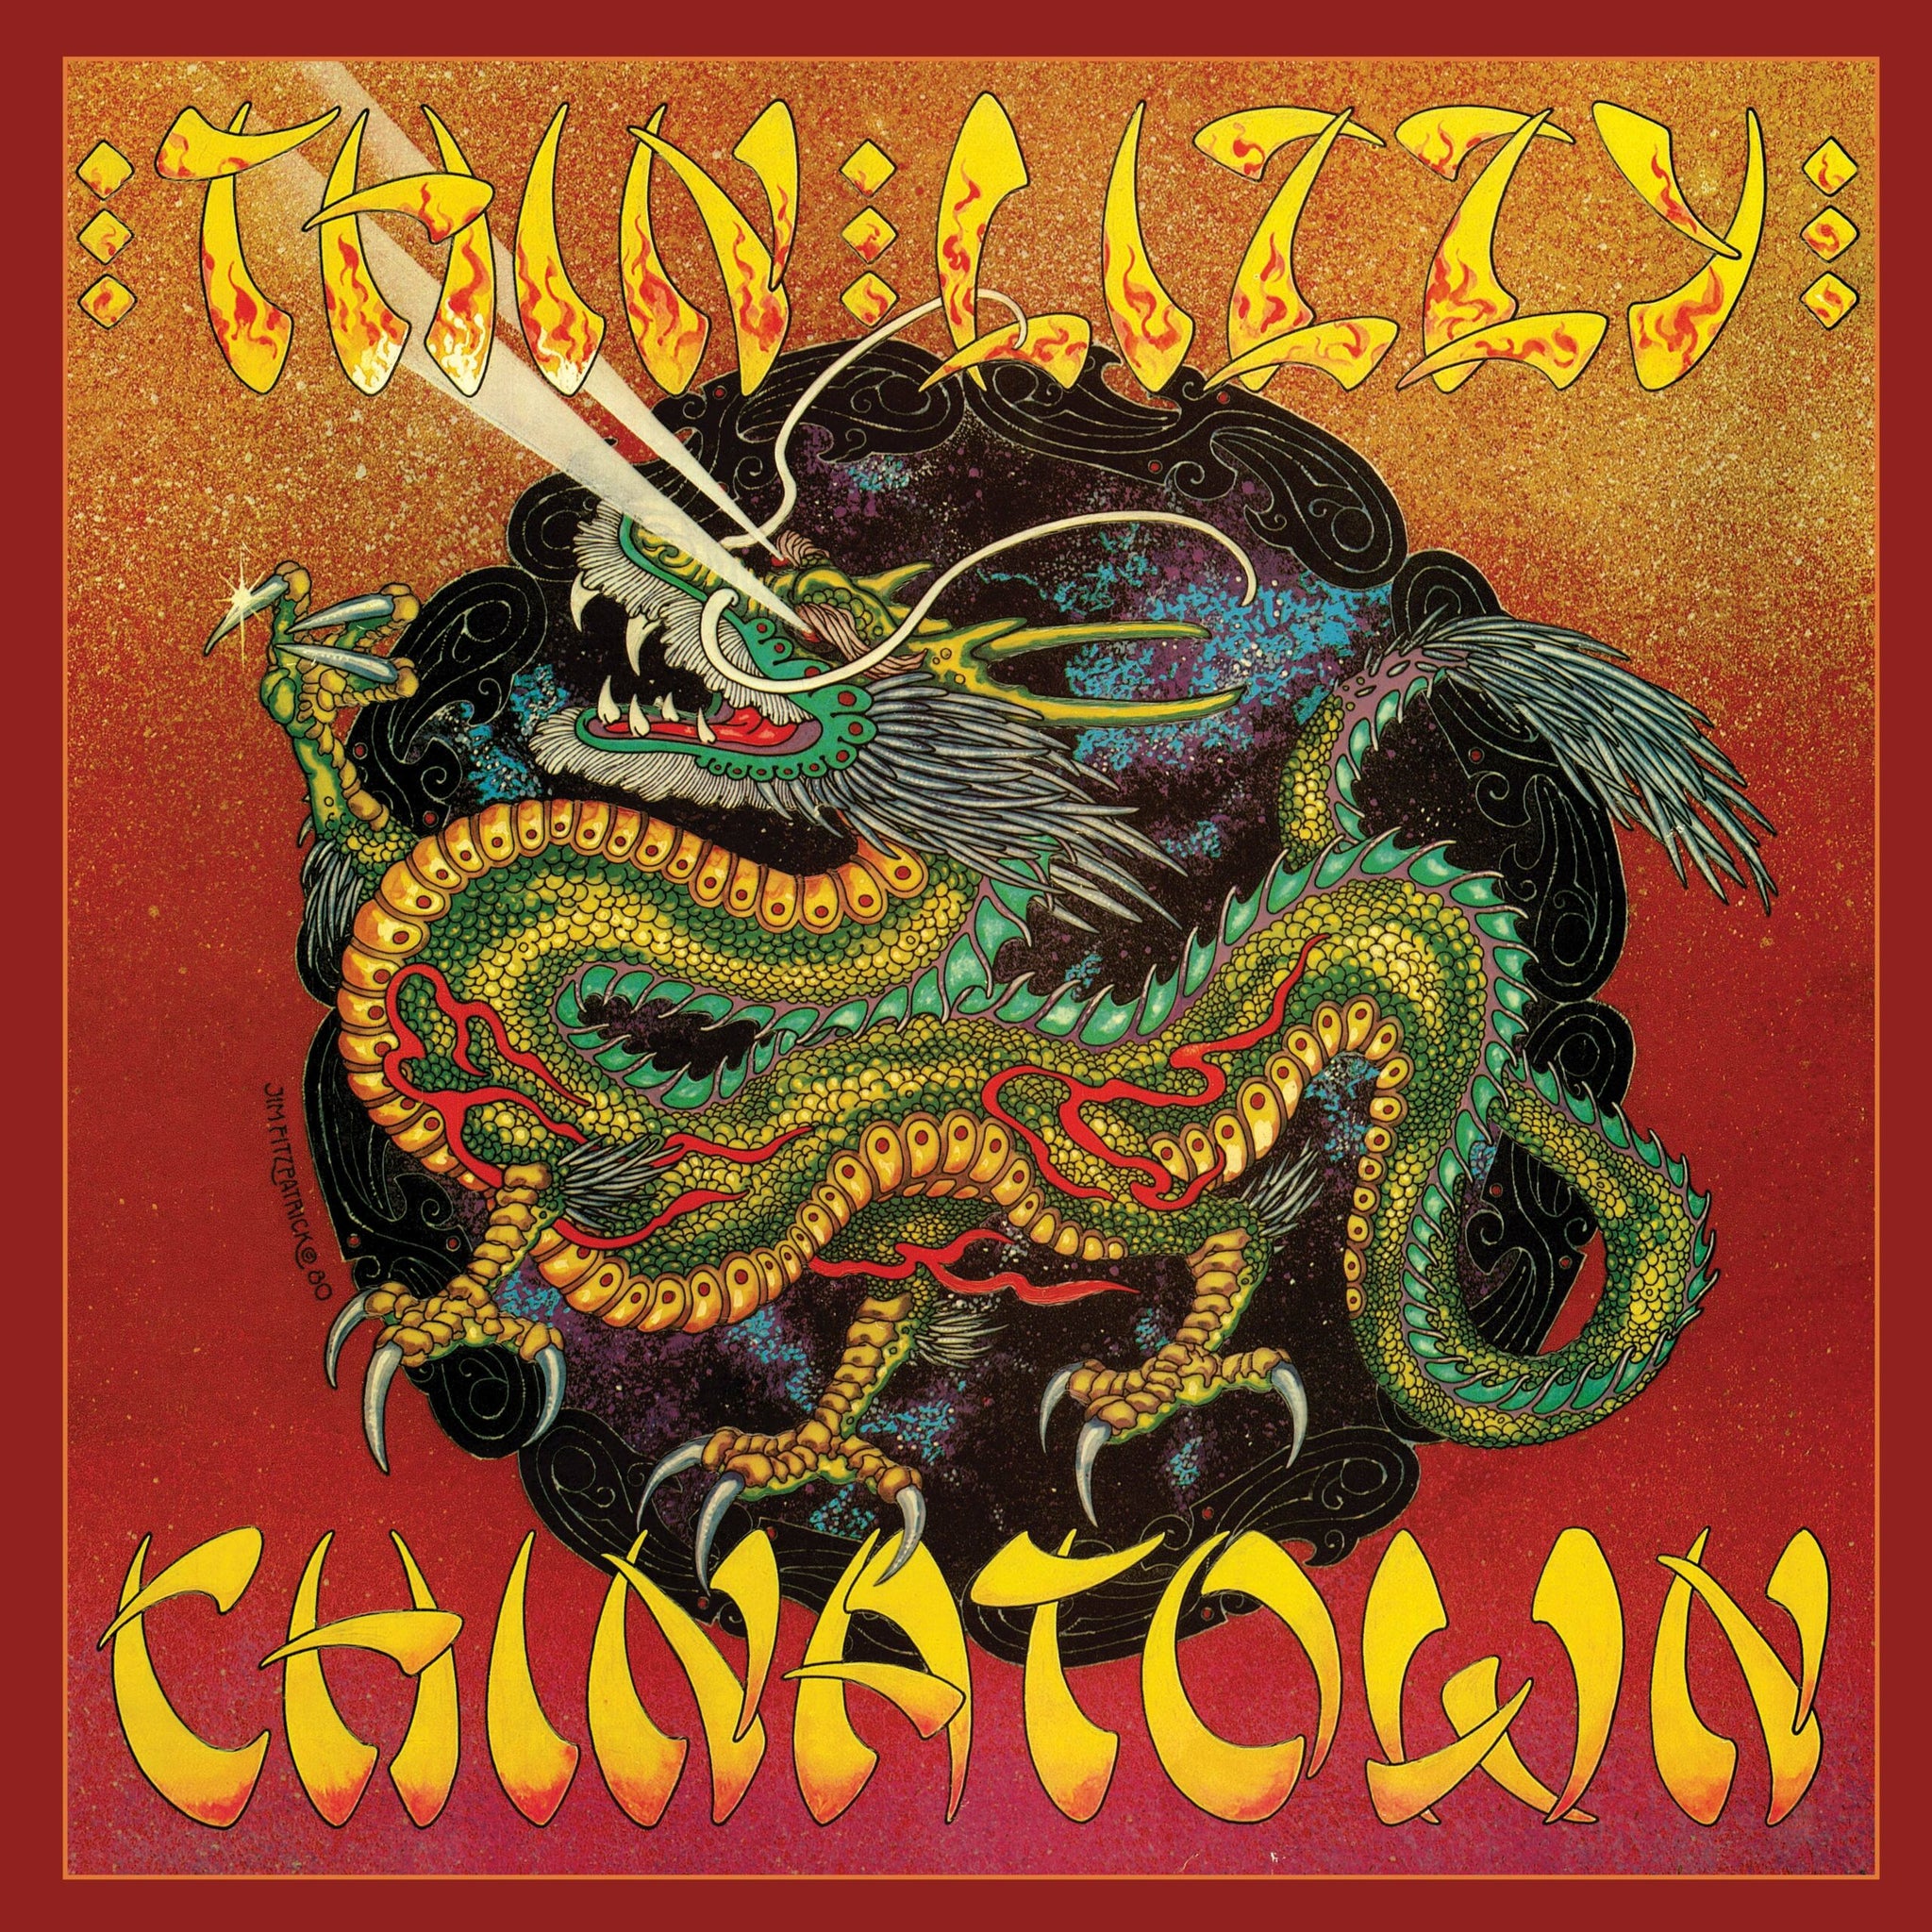 THIN LIZZY - Chinatown (40th Anniversary Edition) - 2LP - Limited Vinyl [RSD2020-OCT24]